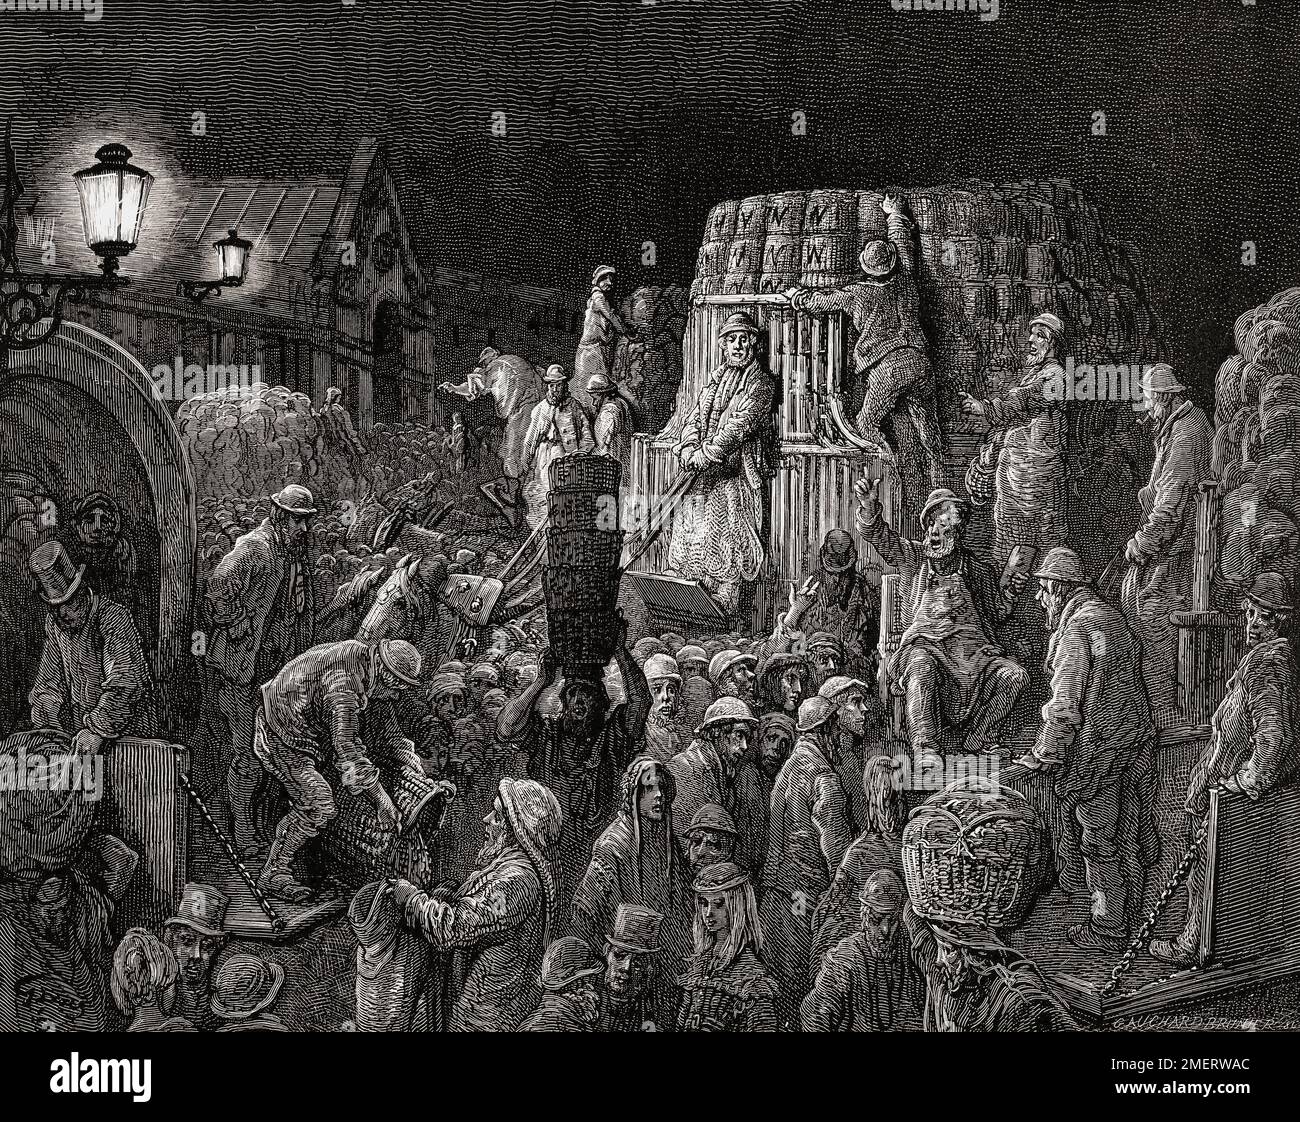 Bringing goods into Covent Garden, London, early in the morning.  19th century.  After an illustration by Gustave Doré in the 1890 American edition of London: A Pilgrimage written by Blanchard Jerrold and illustrated by Gustave Doré. Stock Photo